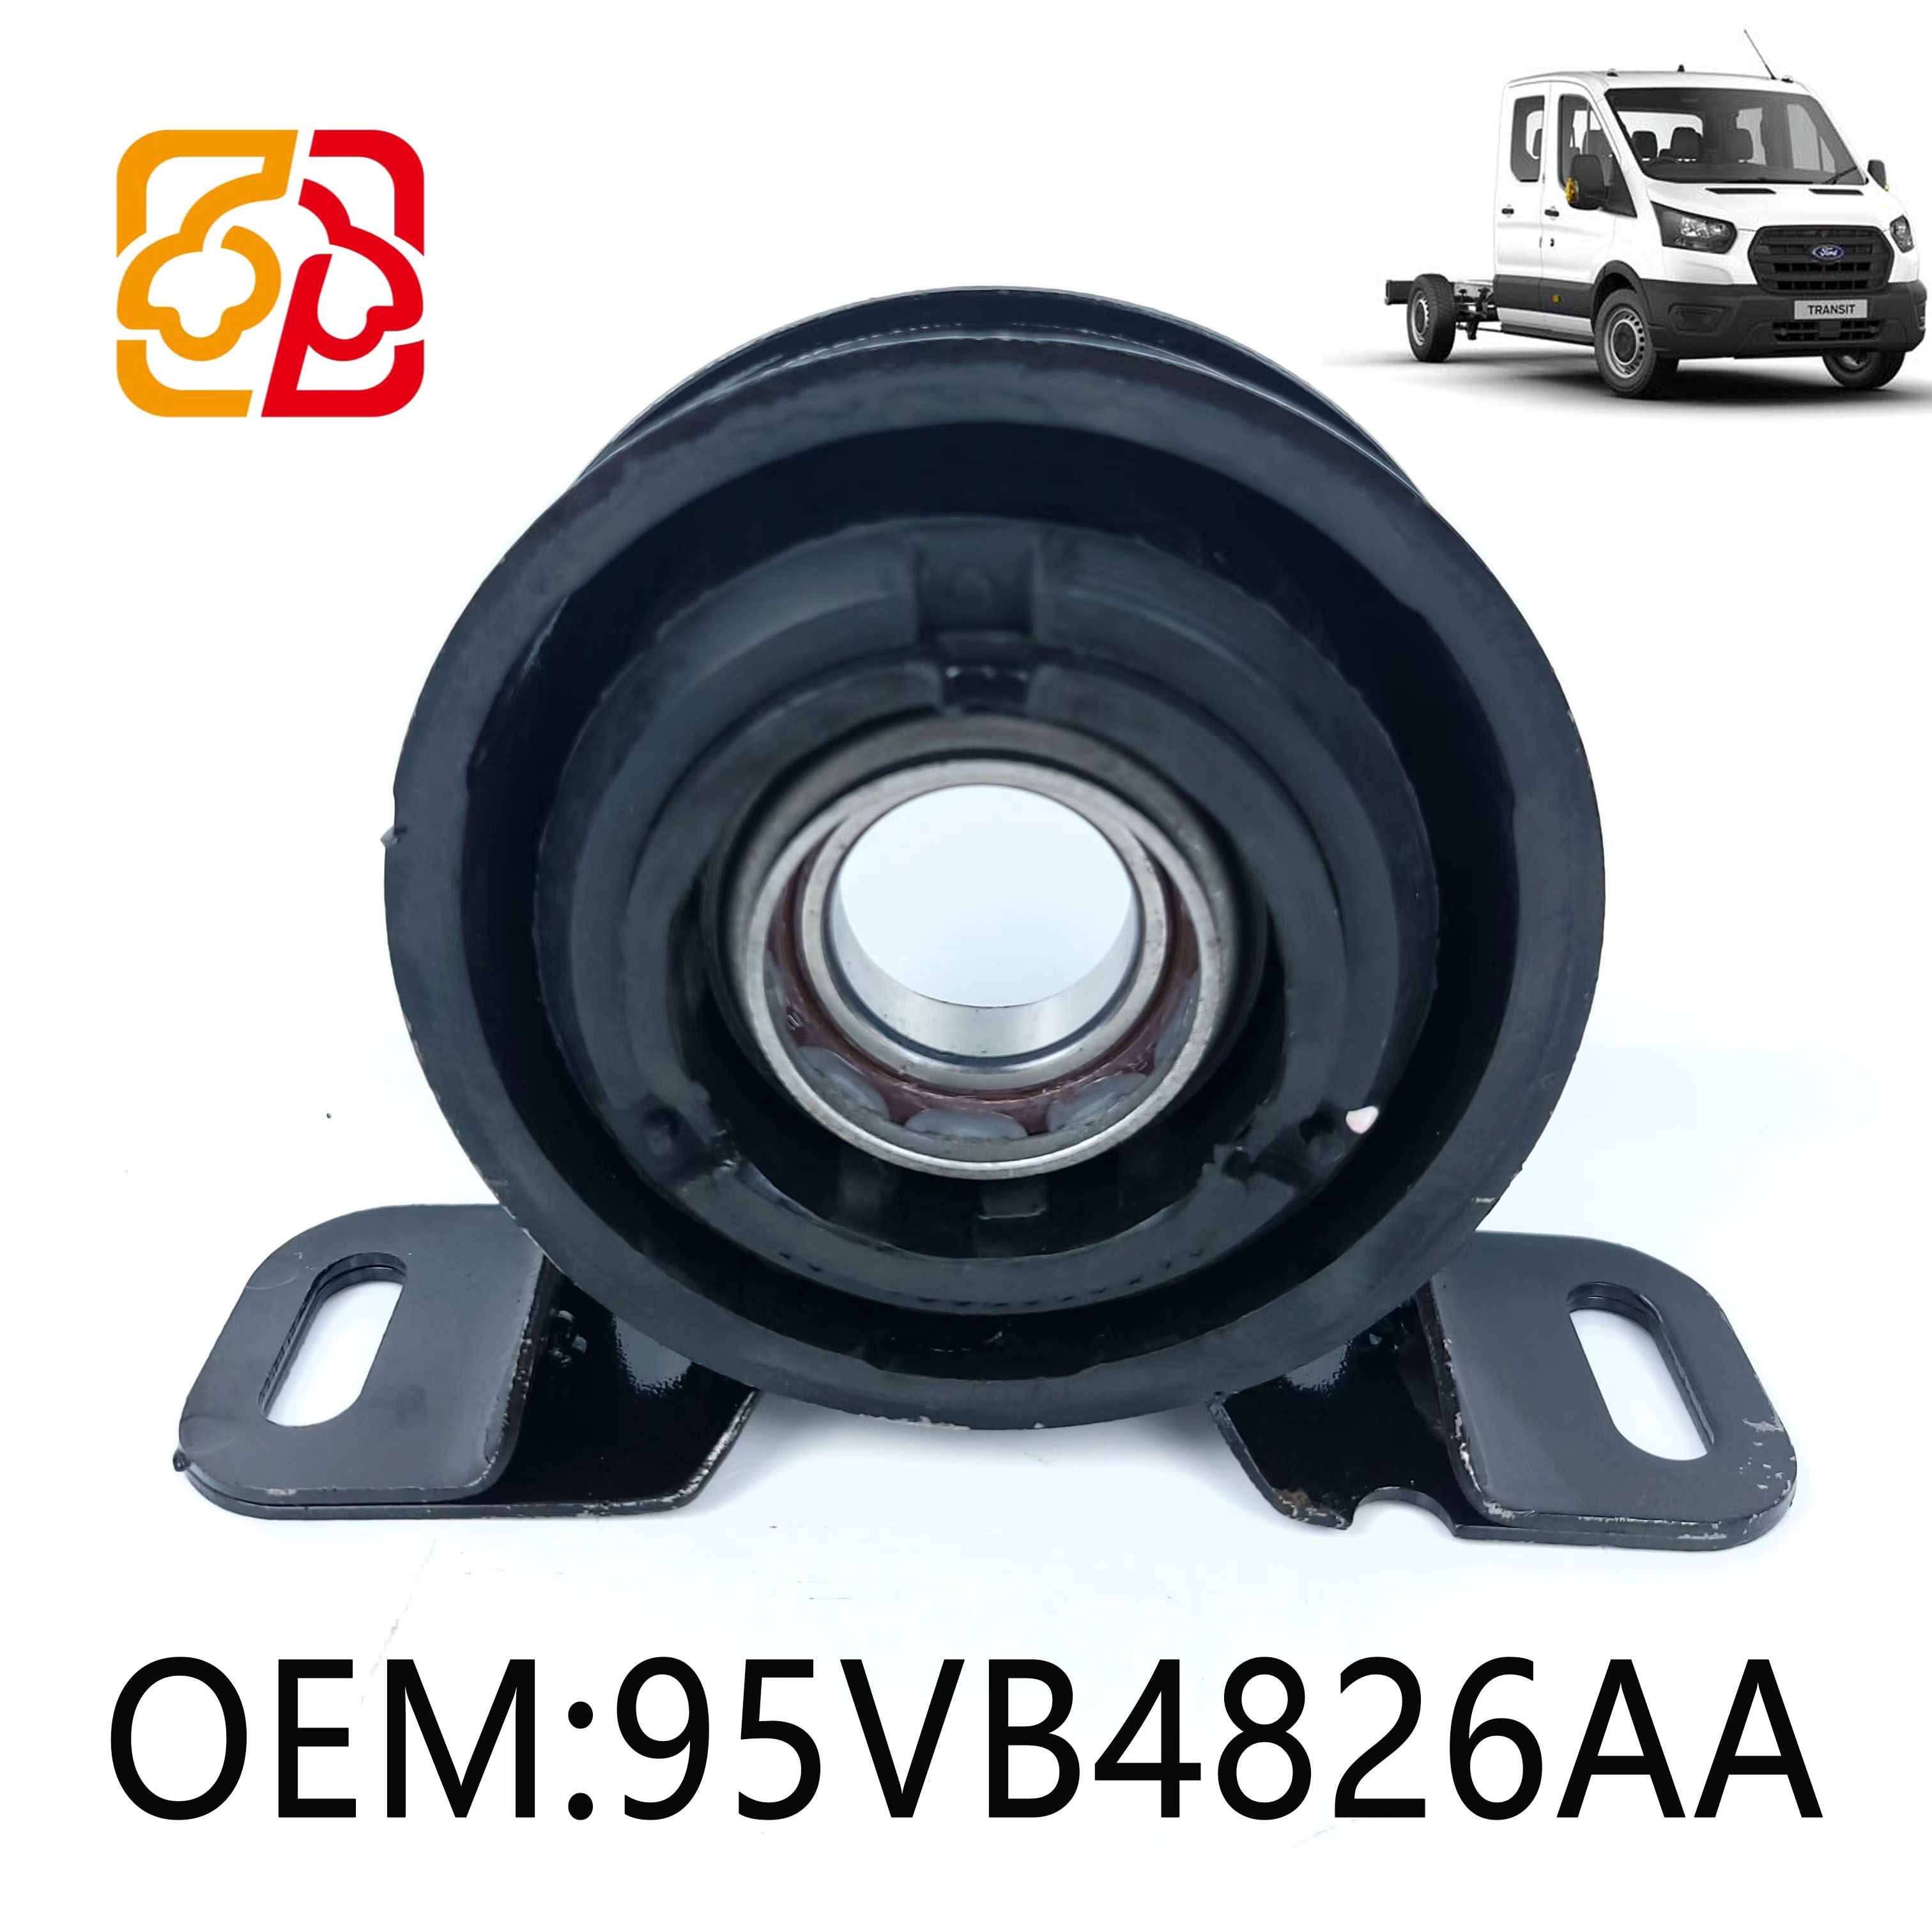 For FORD TRANSIT 7239265 99VB 4826 AB Center Support Bearing Drive Shaft YCIW 4826 BC 95VB4826AA 7239265